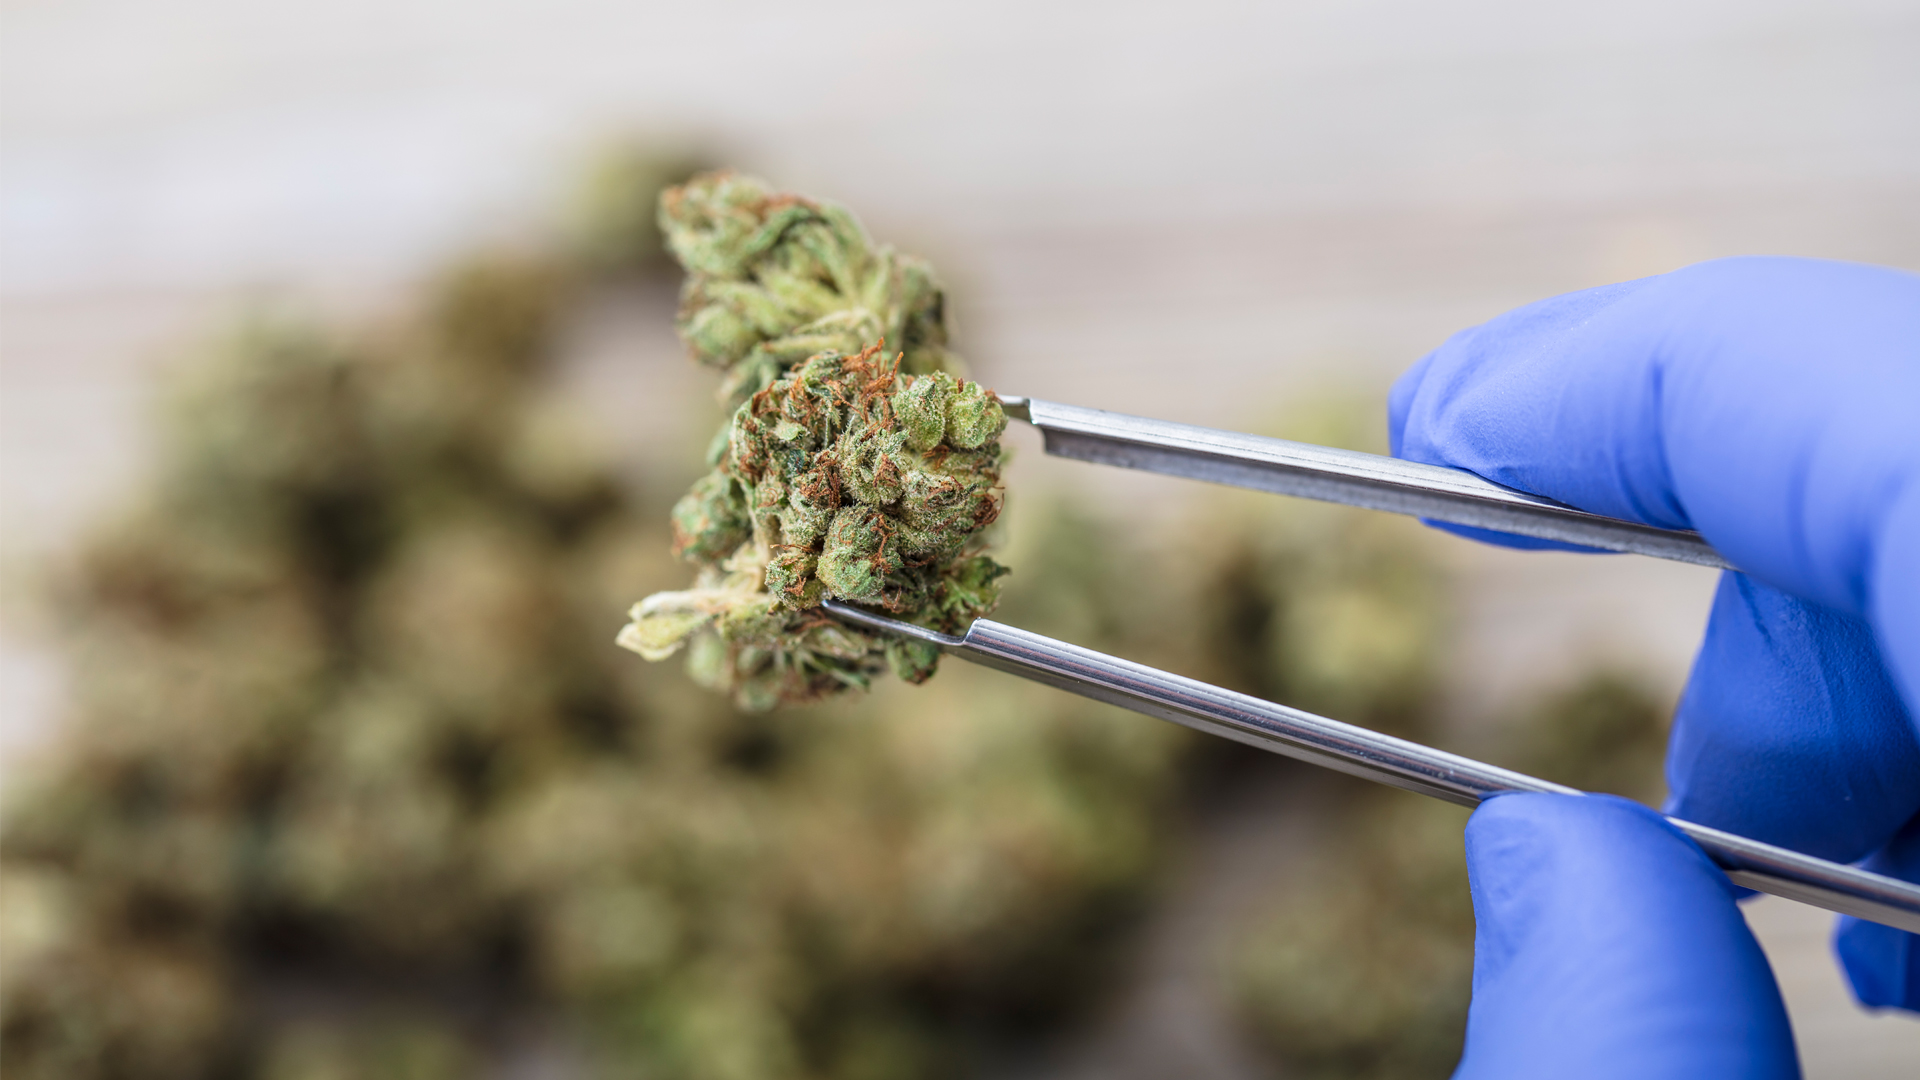 New study to look at impact of COVID-19 on cannabis patients